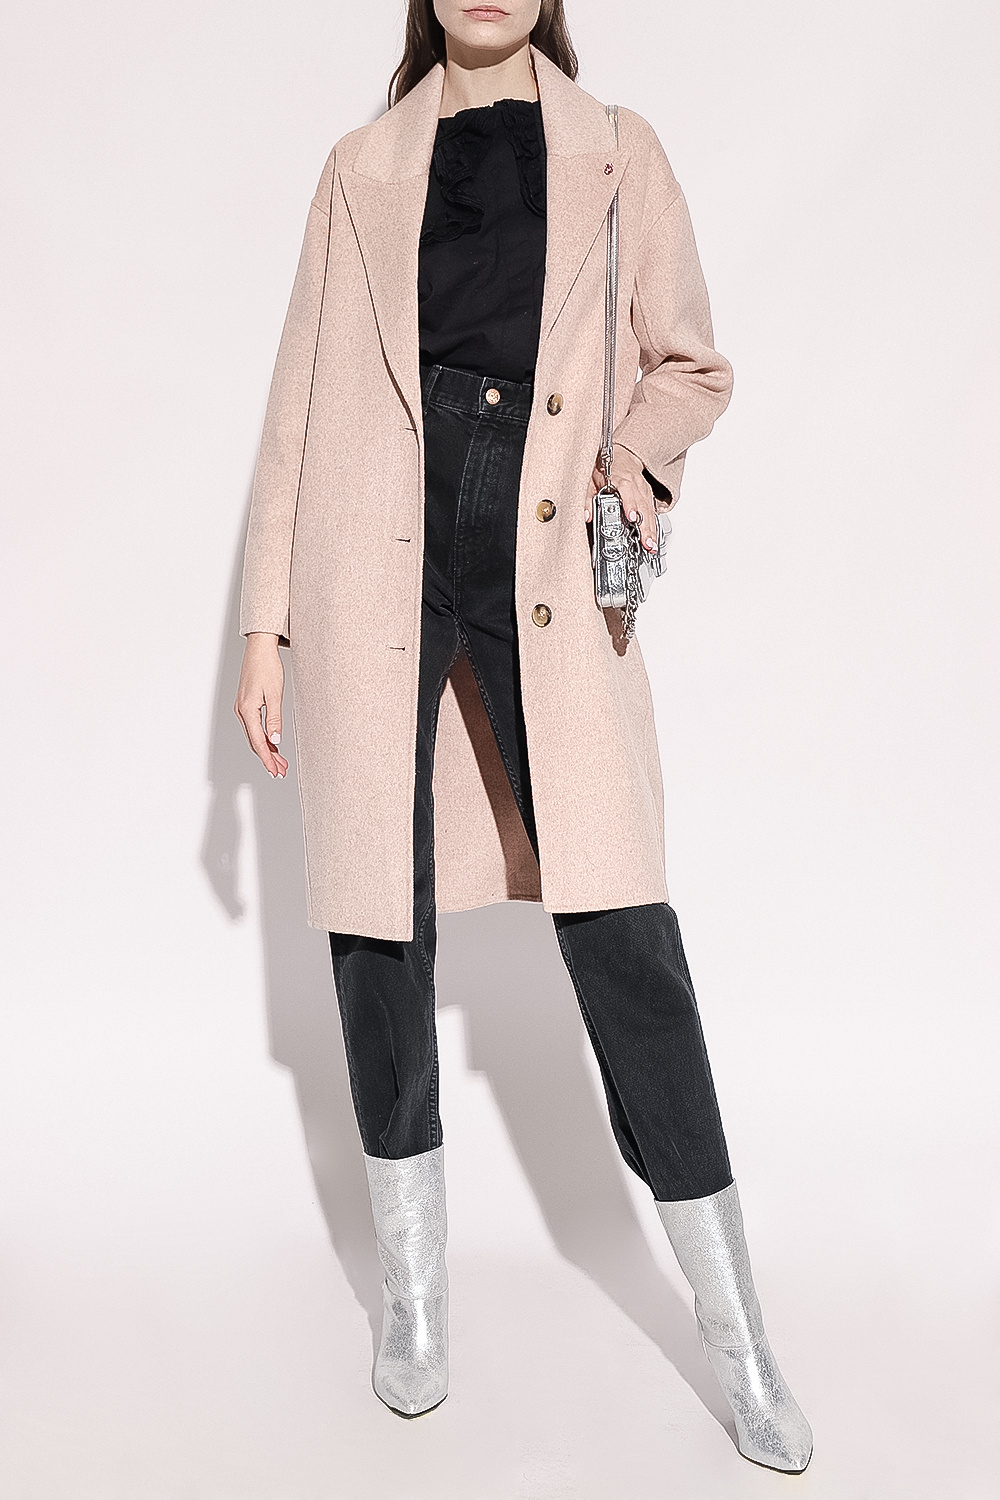 Zadig & Voltaire ‘Mady’ single-breasted coat